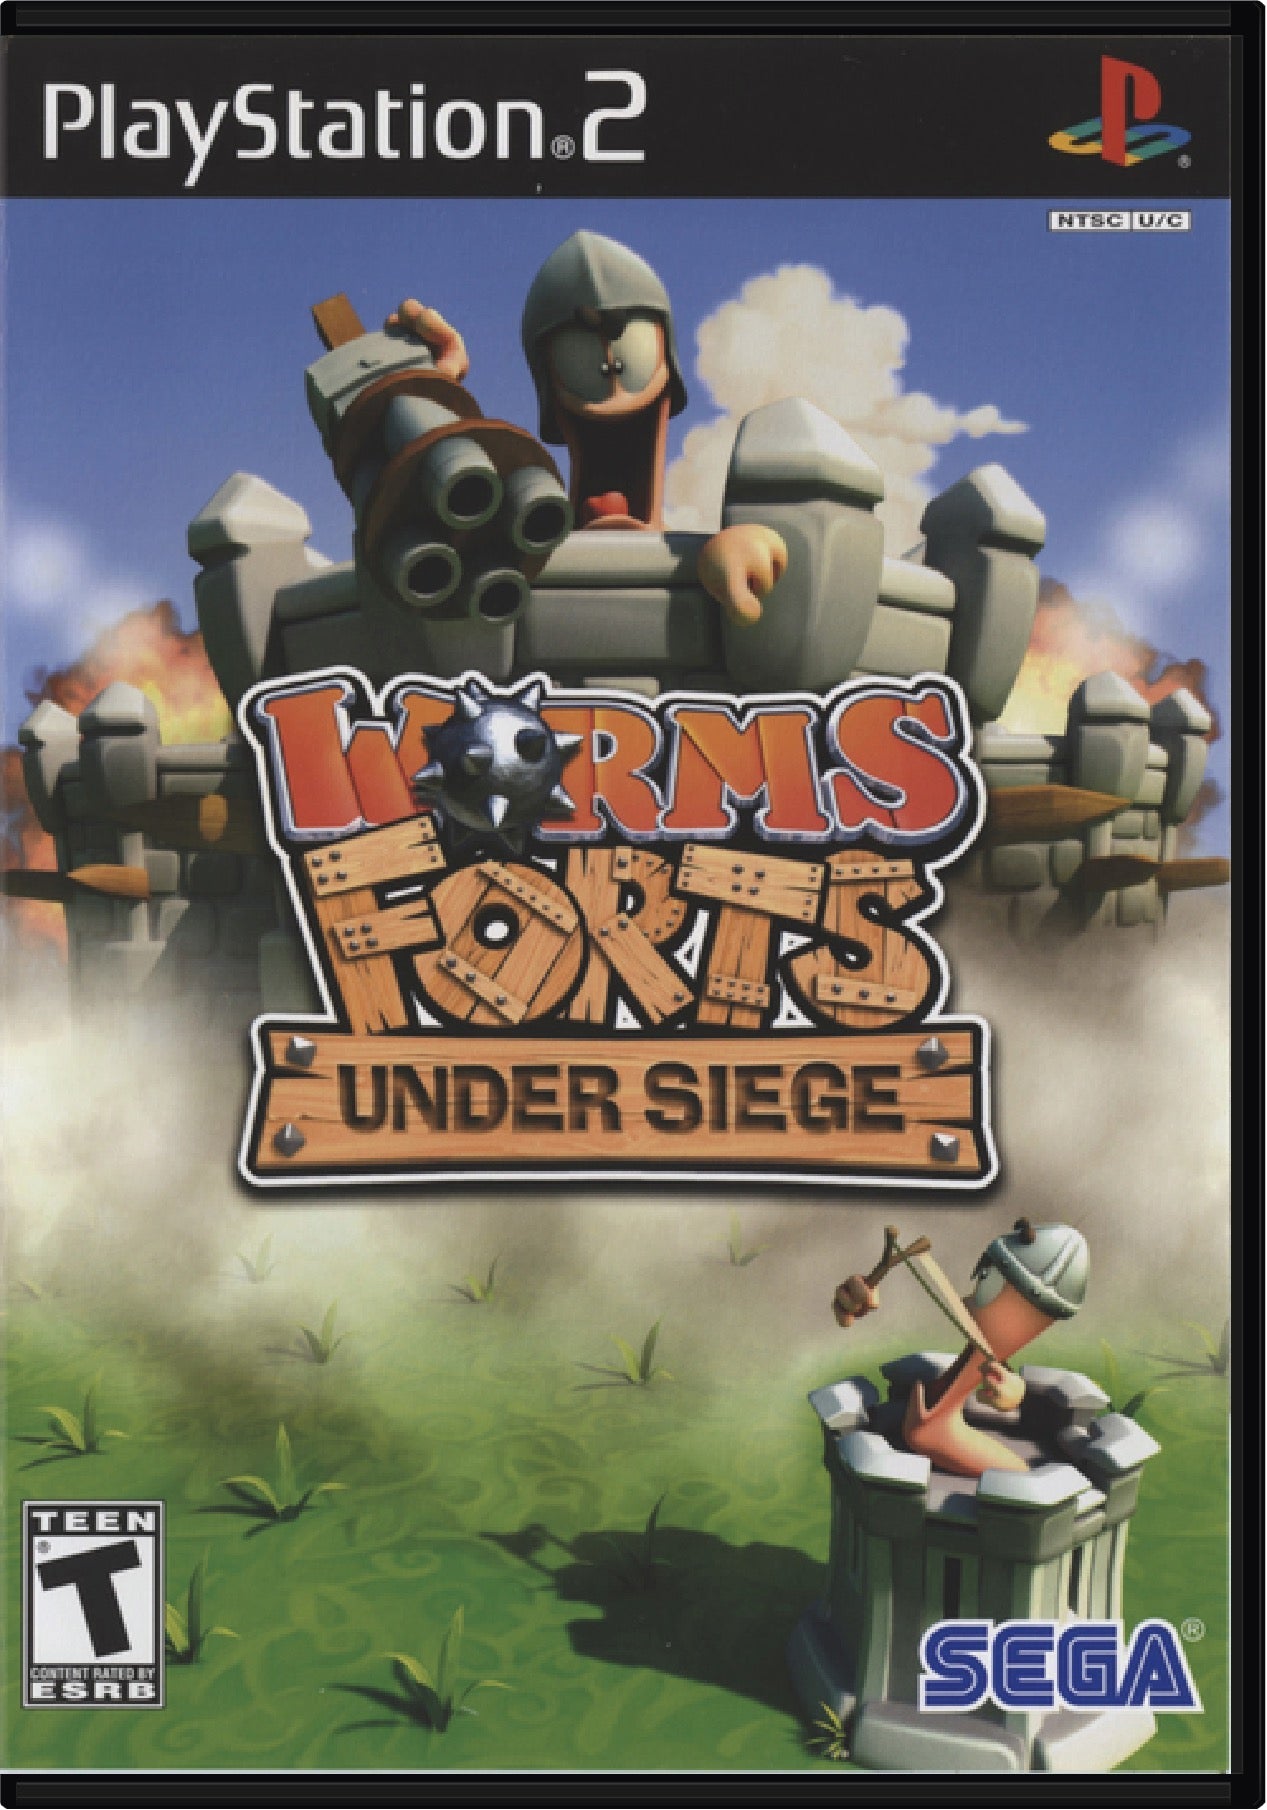 Worms Forts Under Siege Cover Art and Product Photo